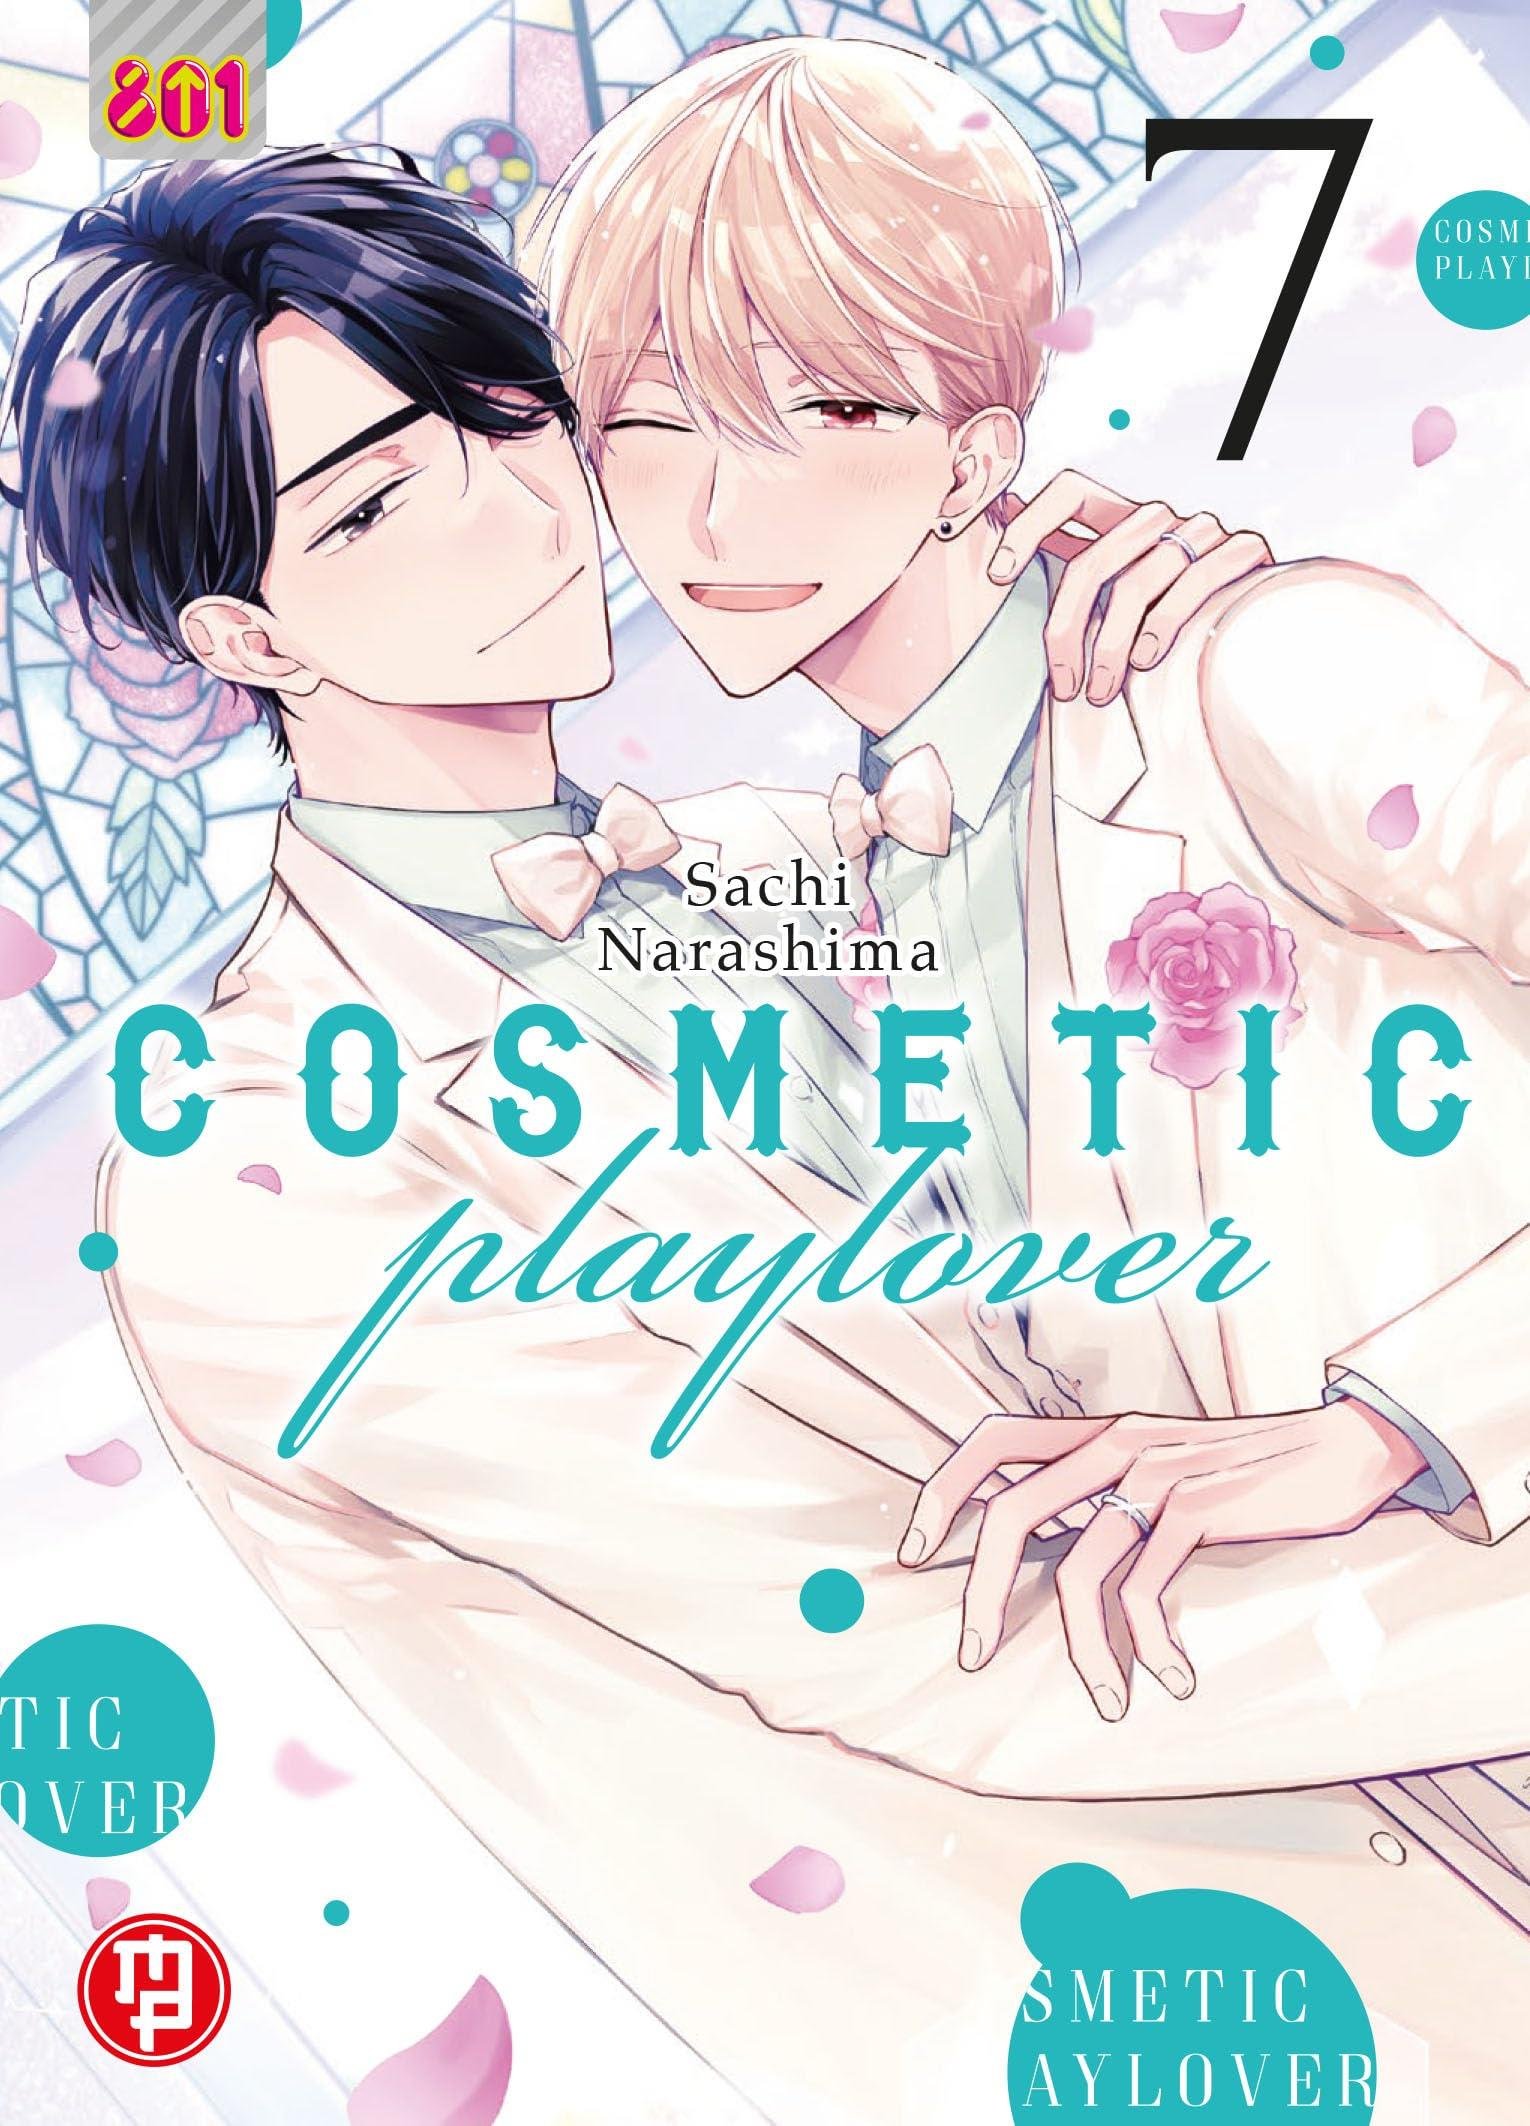 COSMETIC PLAYLOVER 7 LINEA 801